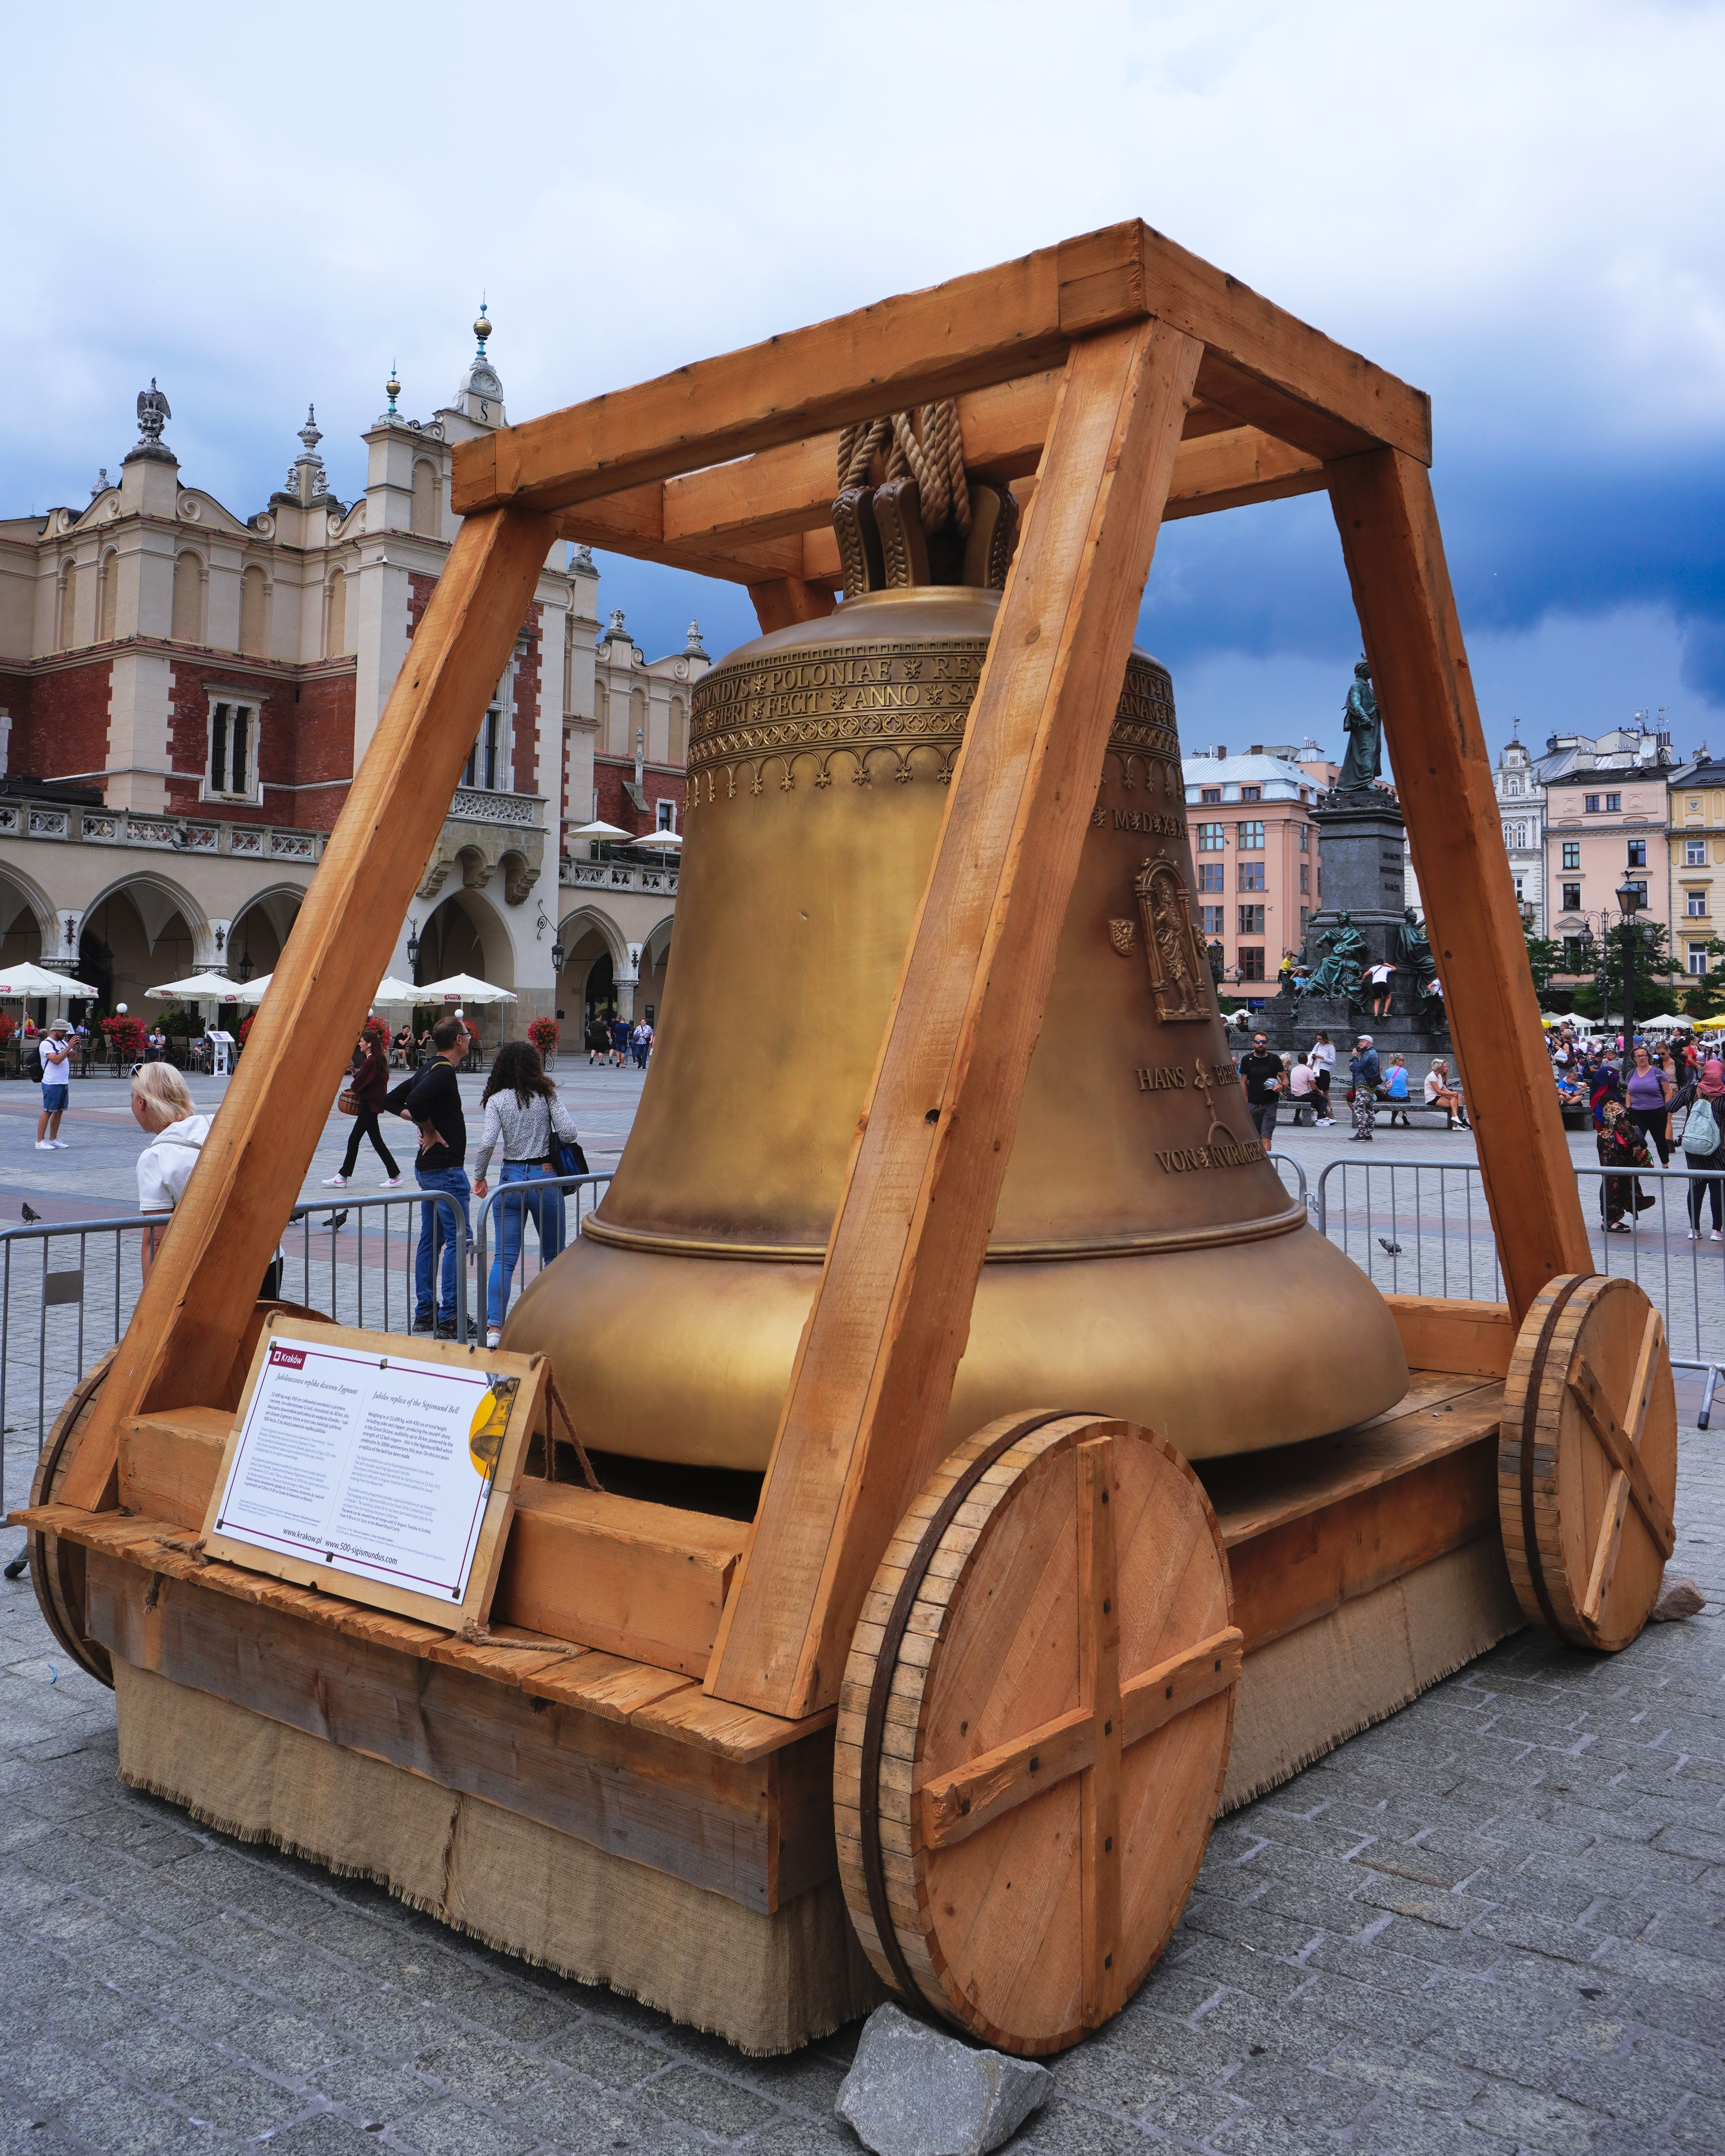 Replica of the Sigismund Bell, made on the occasion of the 500th anniversary of hanging the bell in 2021. Main Market Square, Krakow. Image credit: Mach240390, CC BY 4.0, via Wikimedia Commons.